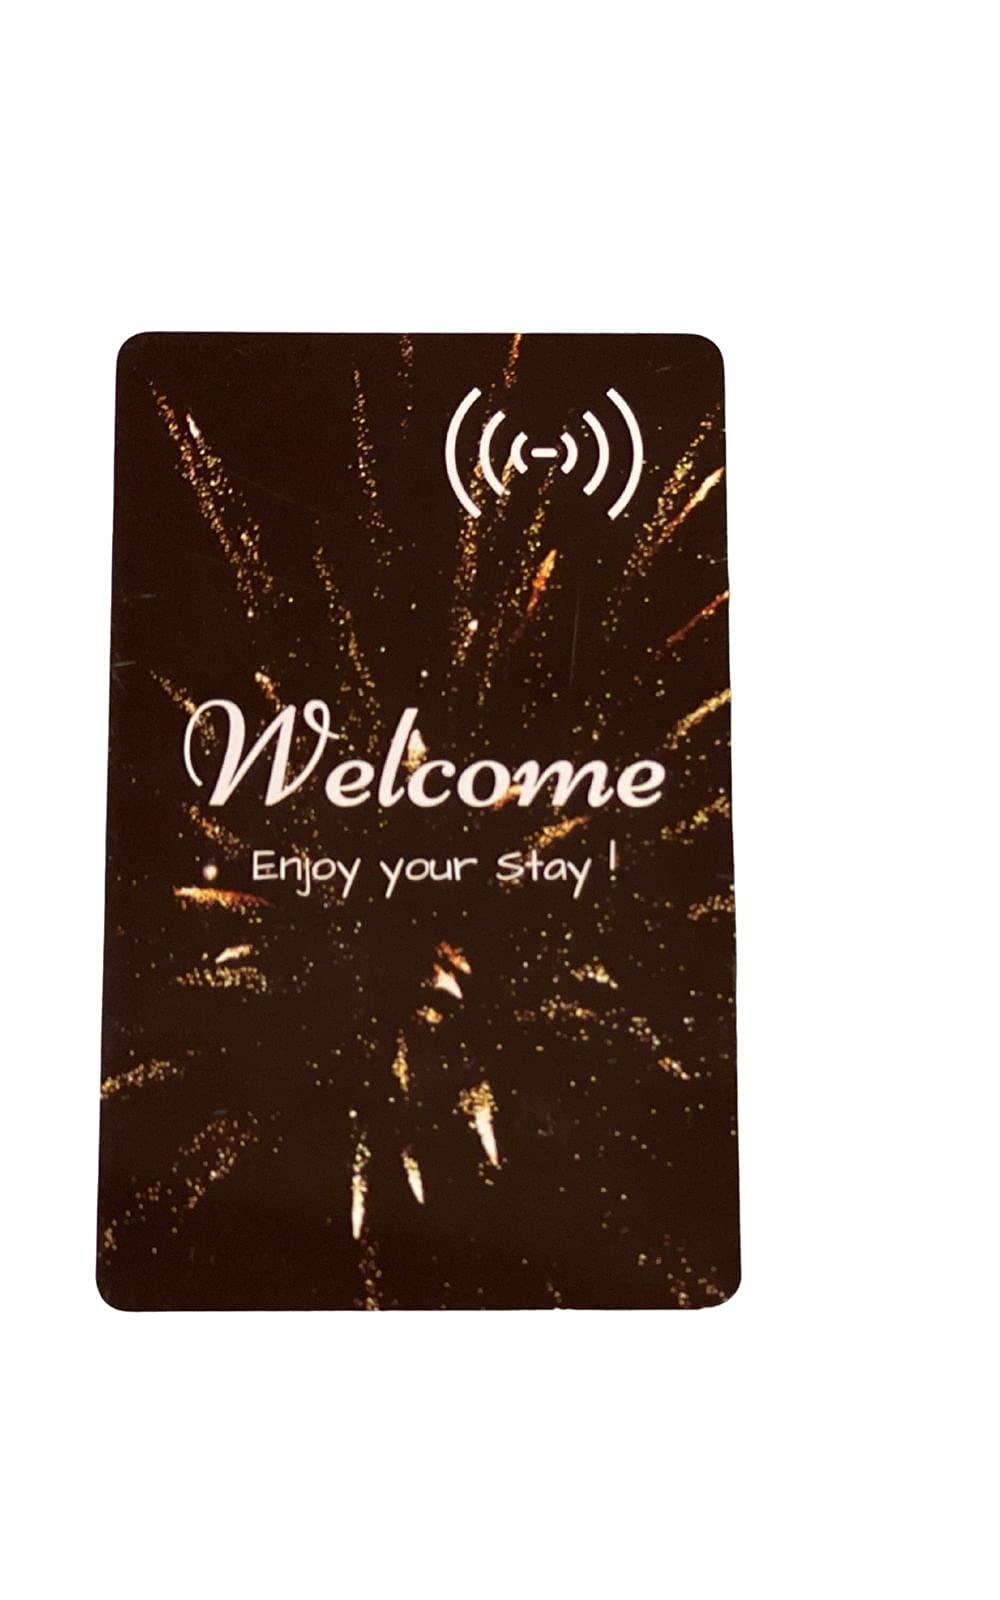 Hotel RFID Key Card (Pack of 200 RFID Key Cards) Compatible with SAFLOK, KABA, ONITY, SECURELOX, Miwa, ILCO